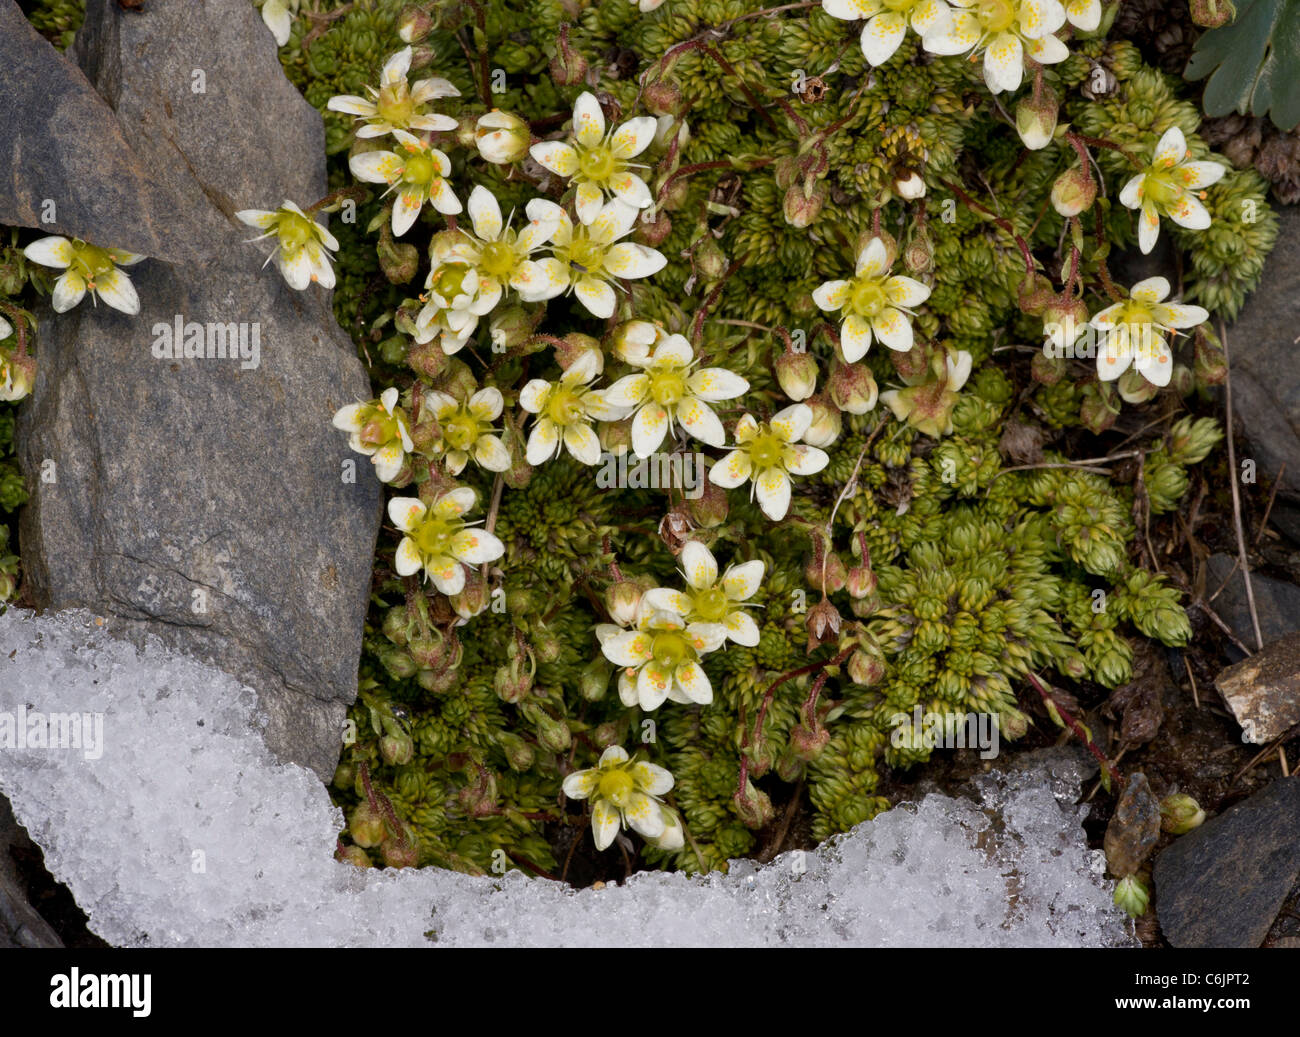 A dwarf saxifrage, Saxifraga bryoides, flowering at the snowline, 3000m in the Swiss Alps. Stock Photo